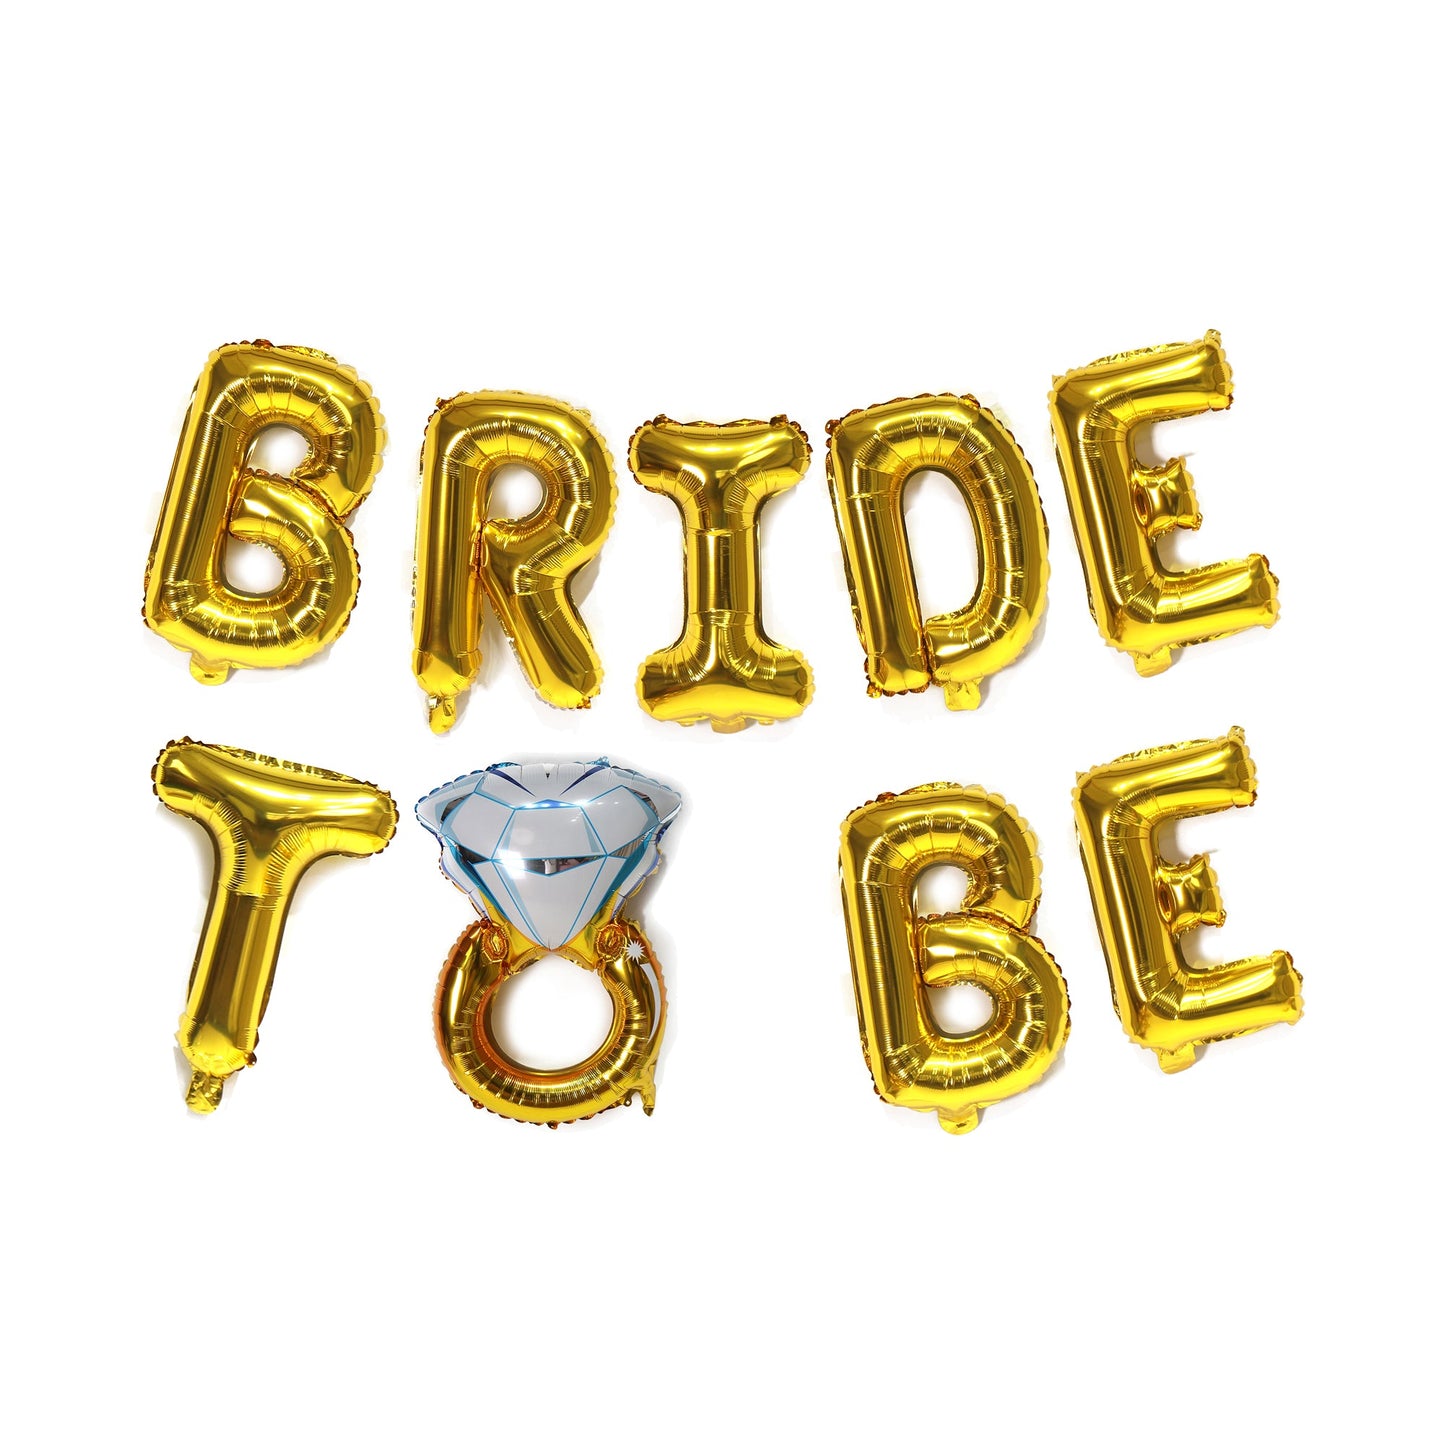 Bride To Be Foil balloon For Bride Party bachelorette (Golden/Silver/Rose Gold) 16" Inch